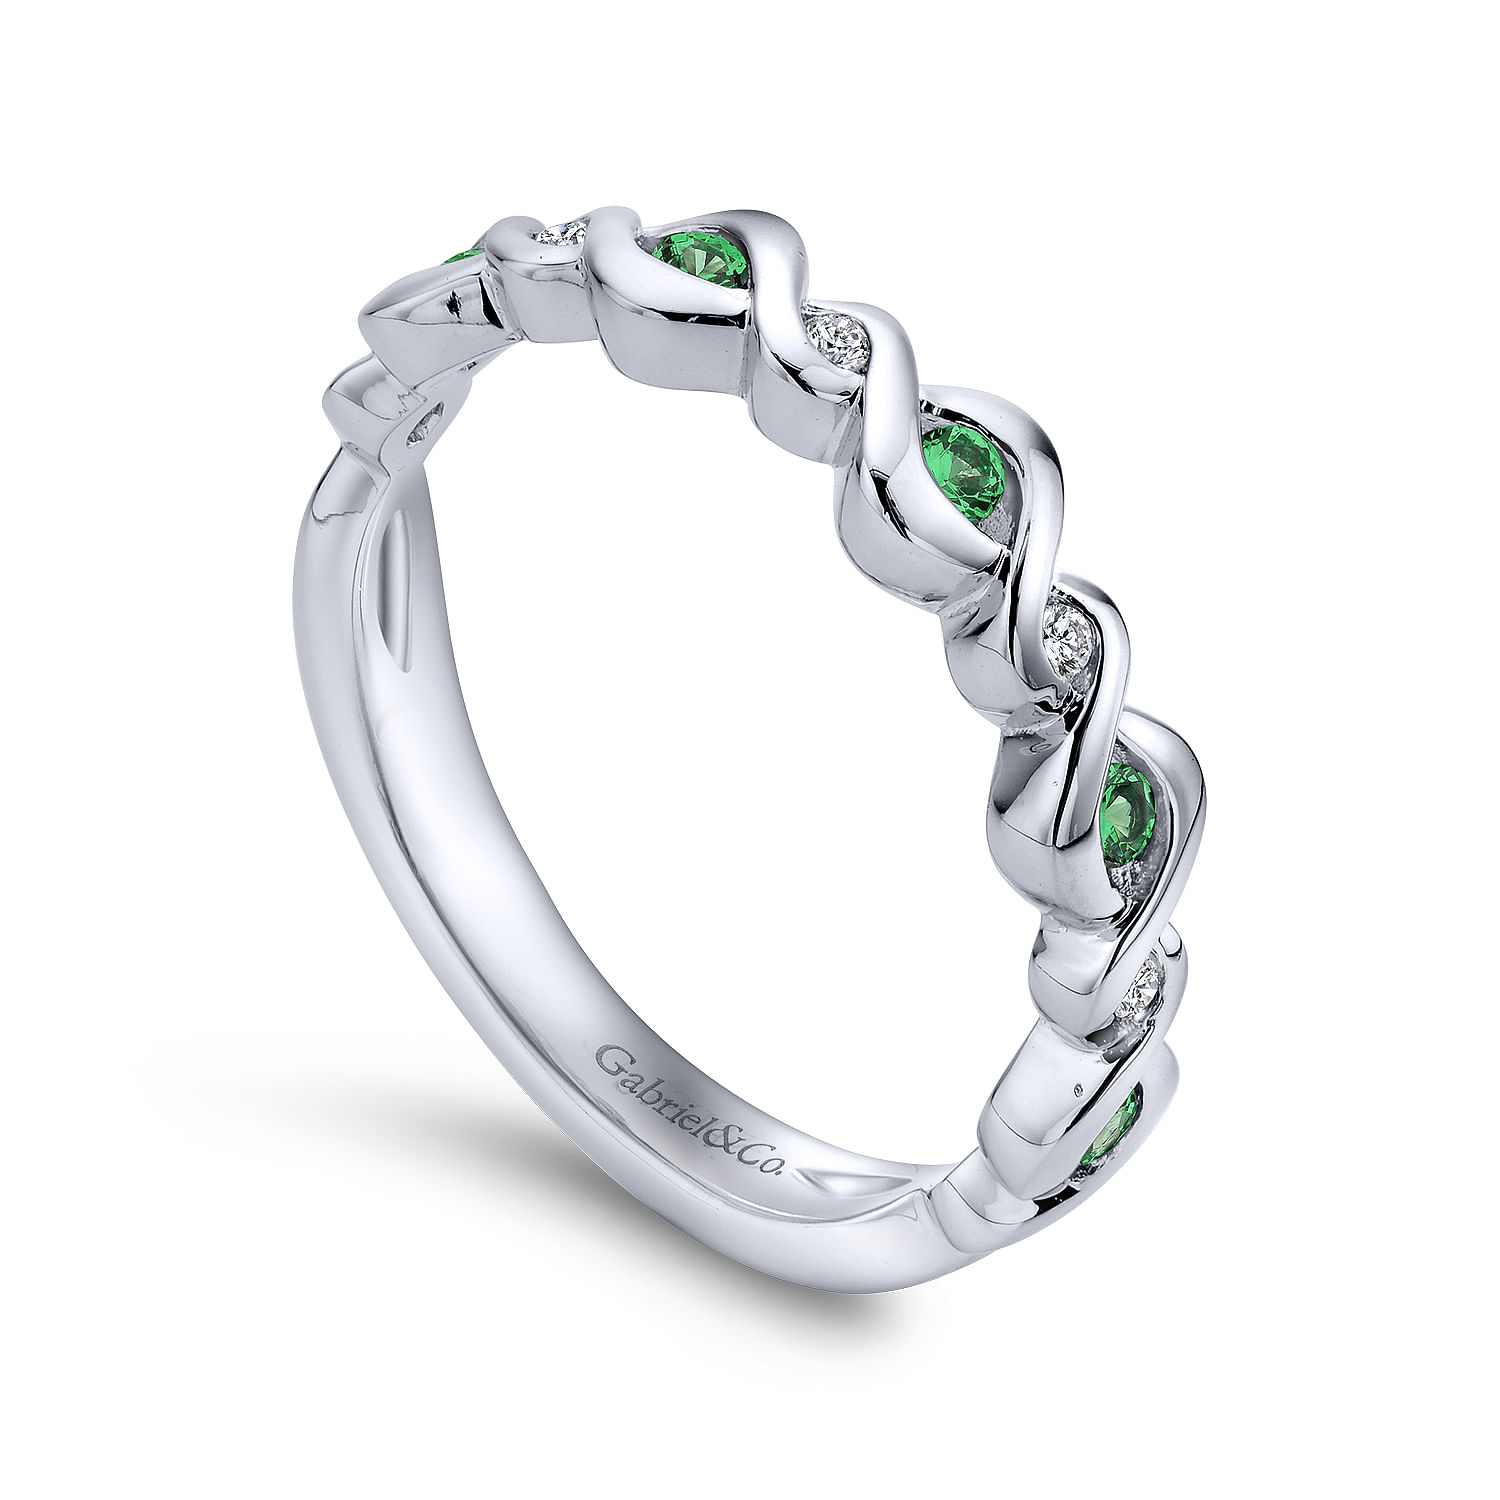 14K White Gold Twisted Ring with Emerald and Diamond Stones